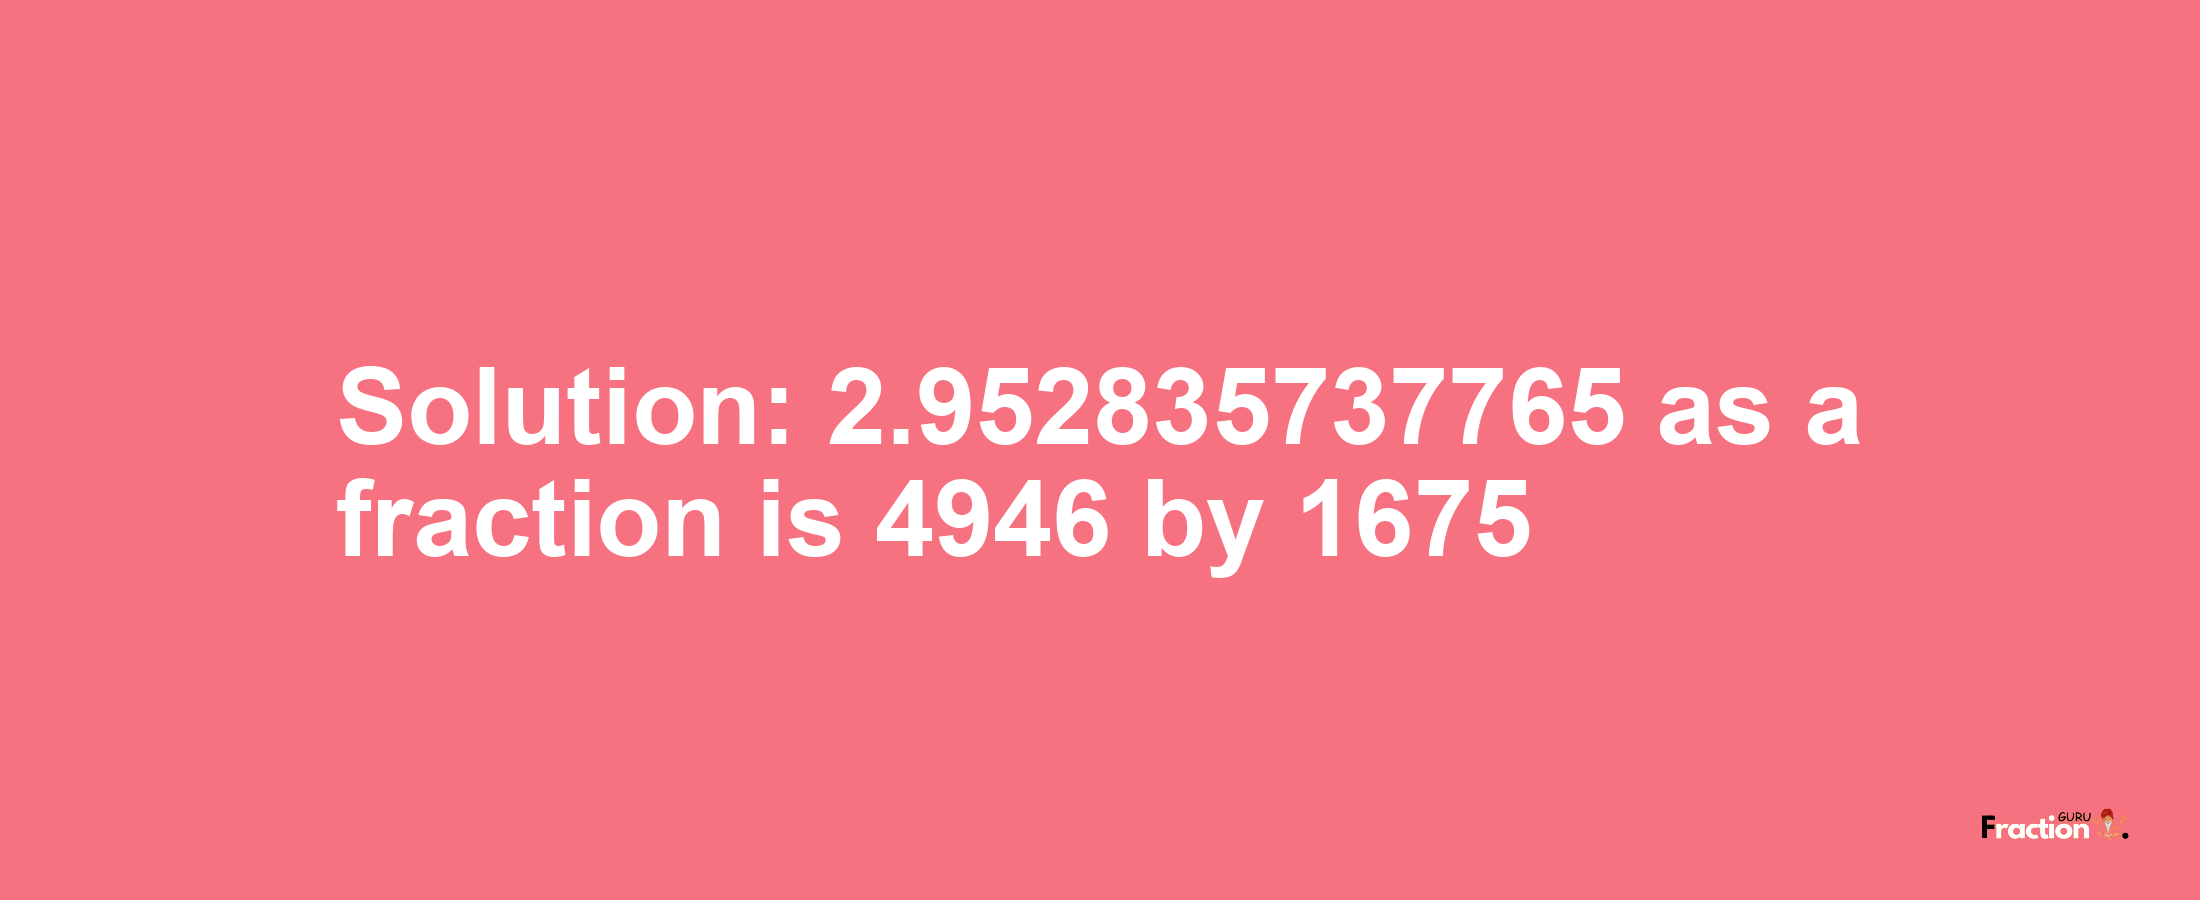 Solution:2.952835737765 as a fraction is 4946/1675